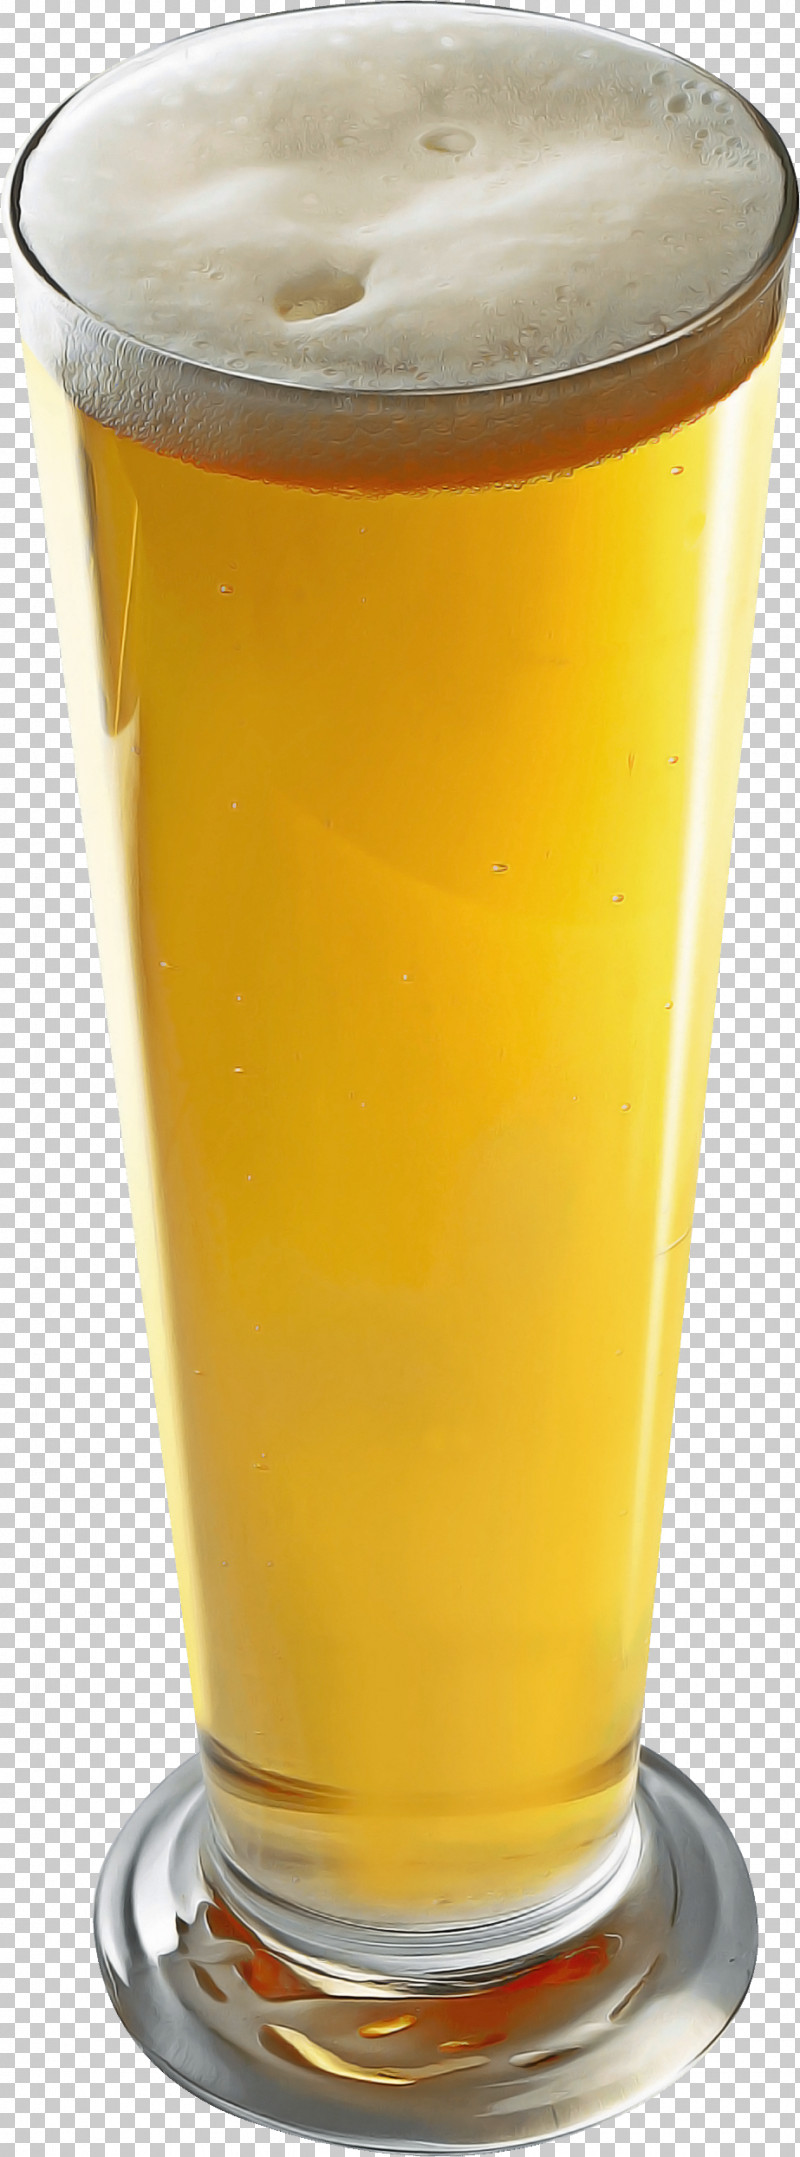 Yellow Pint Glass Drink Juice Harvey Wallbanger PNG, Clipart, Beer Glass, Drink, Drinkware, Harvey Wallbanger, Juice Free PNG Download